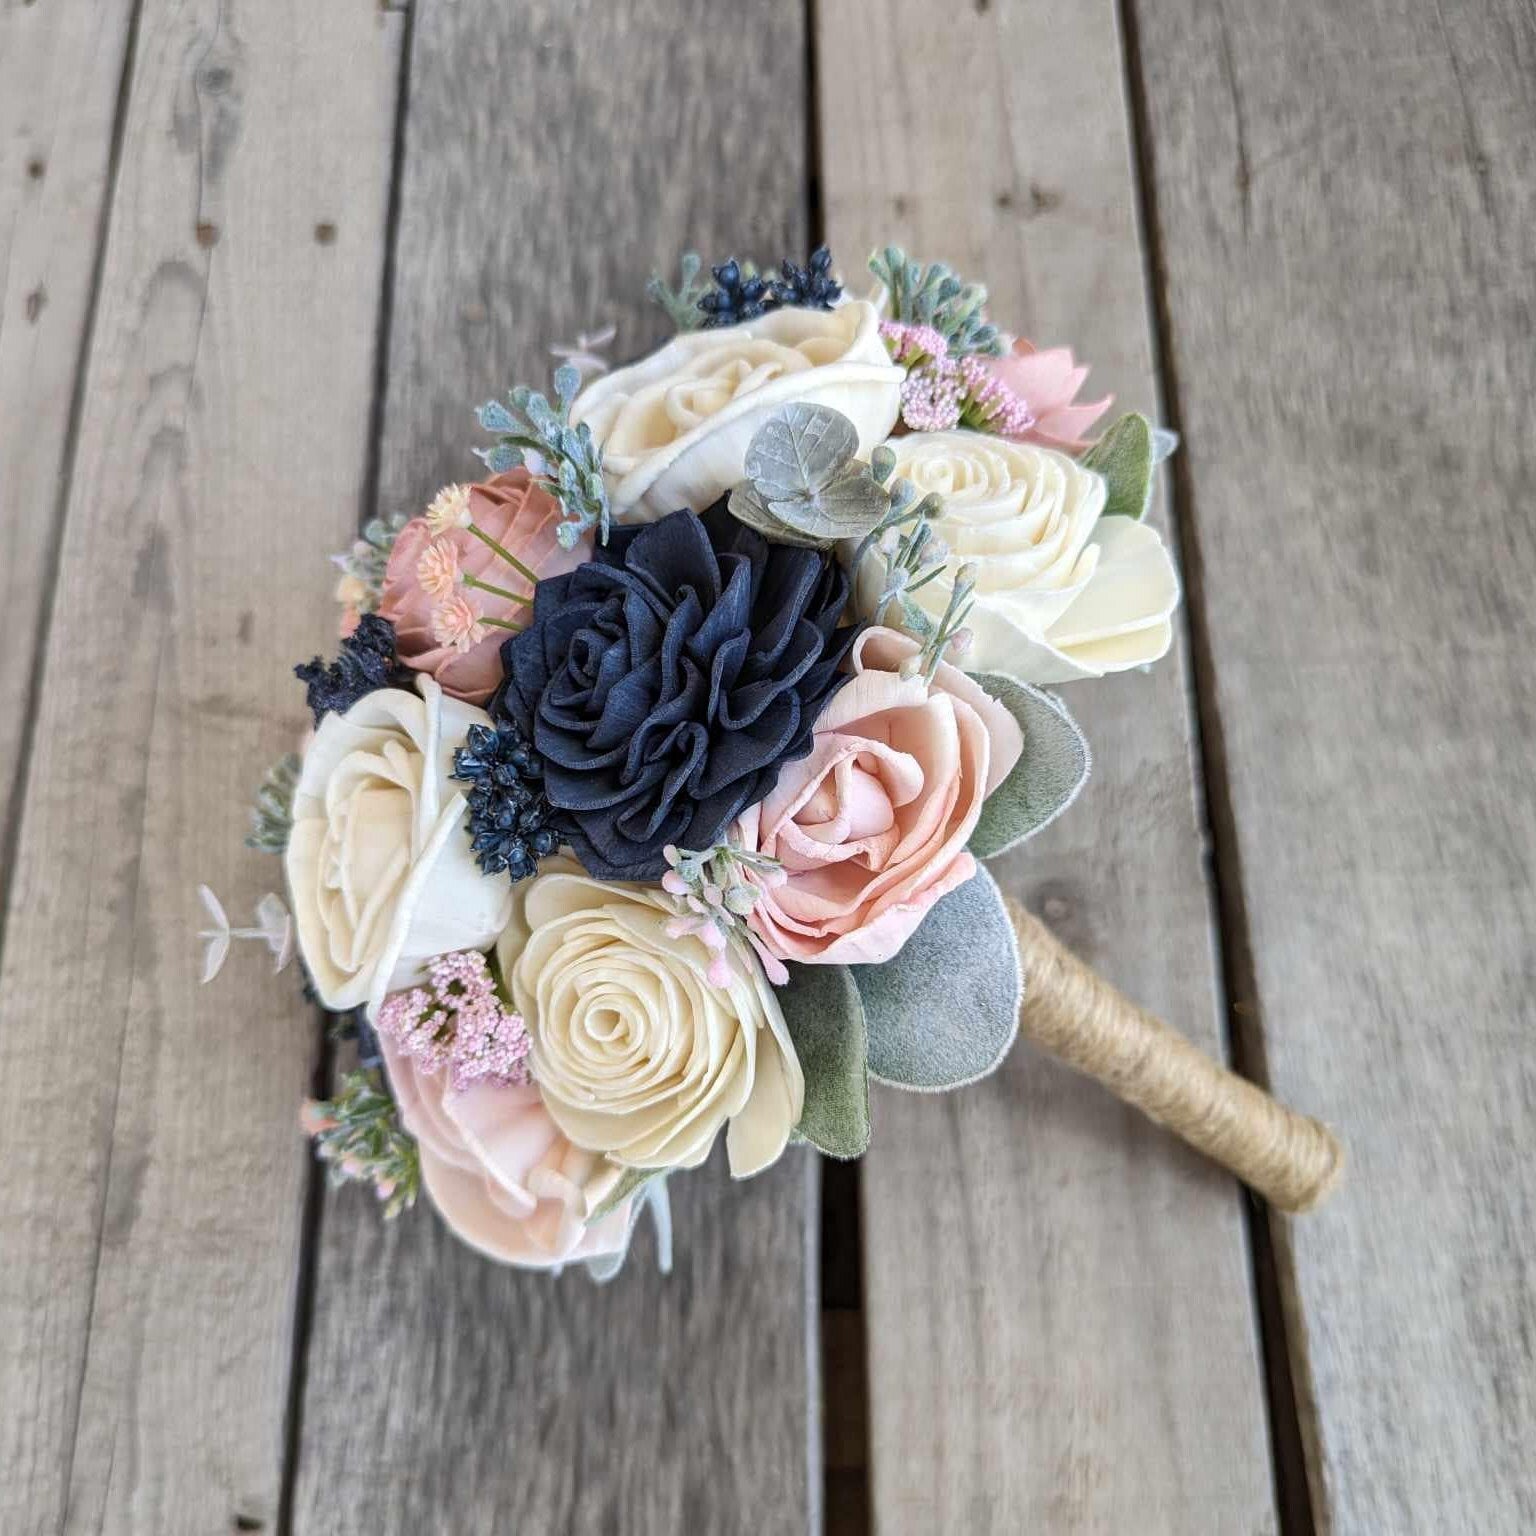 Navy Blue and Blush Pink Artificial Wedding Bouquet with Sola Wood Flowers, Wooden Flowers Bridal Bouquet, Blush Bridesmaid Bouquet